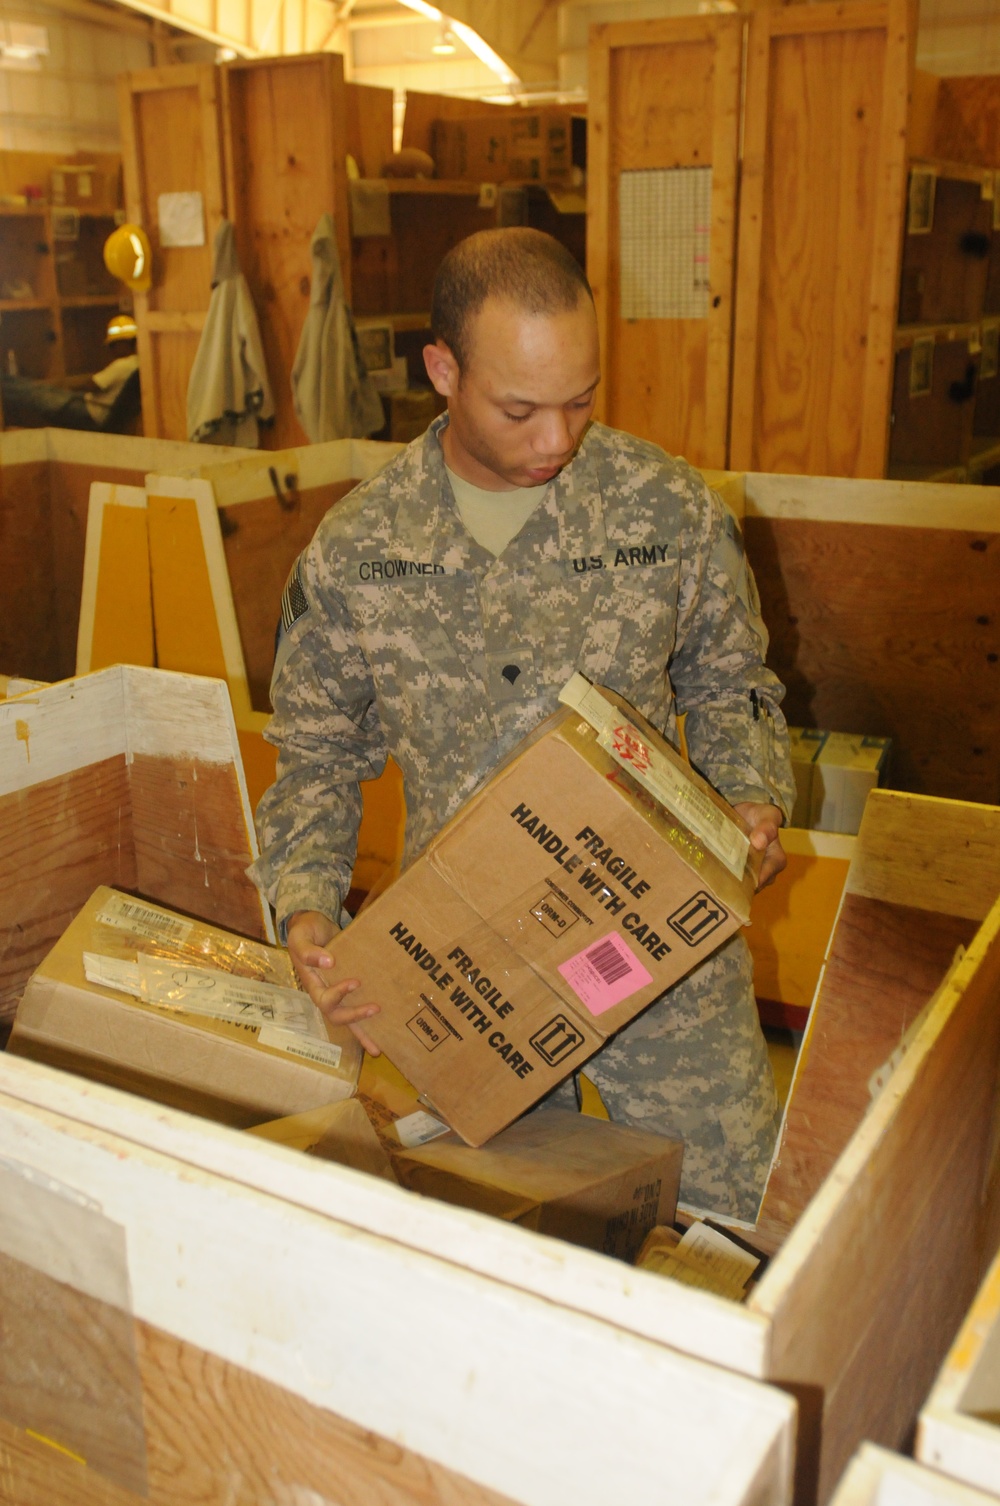 Providers Operate Army's Largest Supply Support Activity